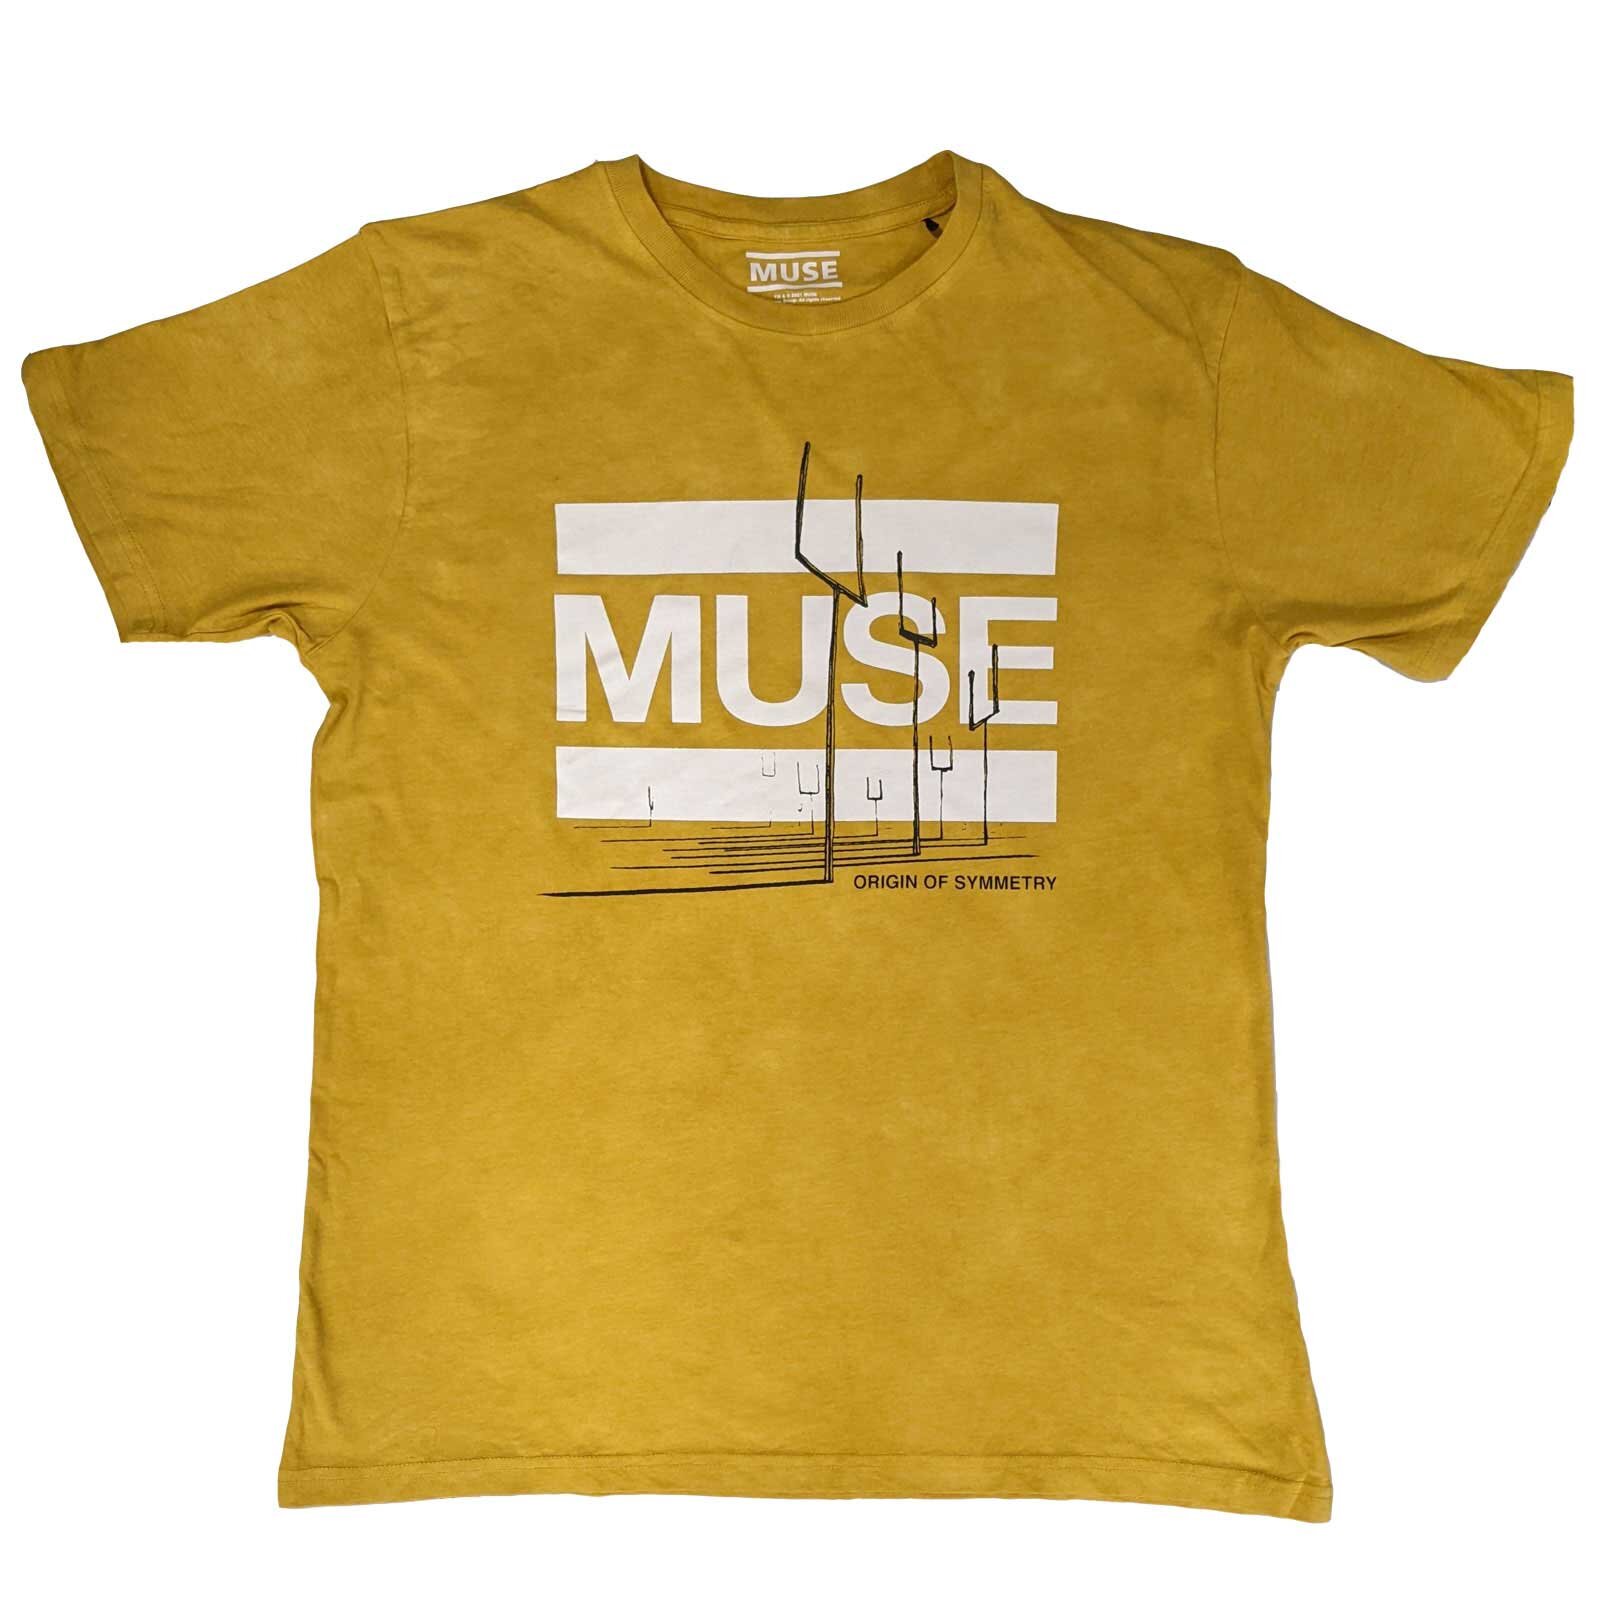 Rockoff MUSE Unisex T-Shirt: Origin of Symmetry (Wash Collection) Size L : photo 1